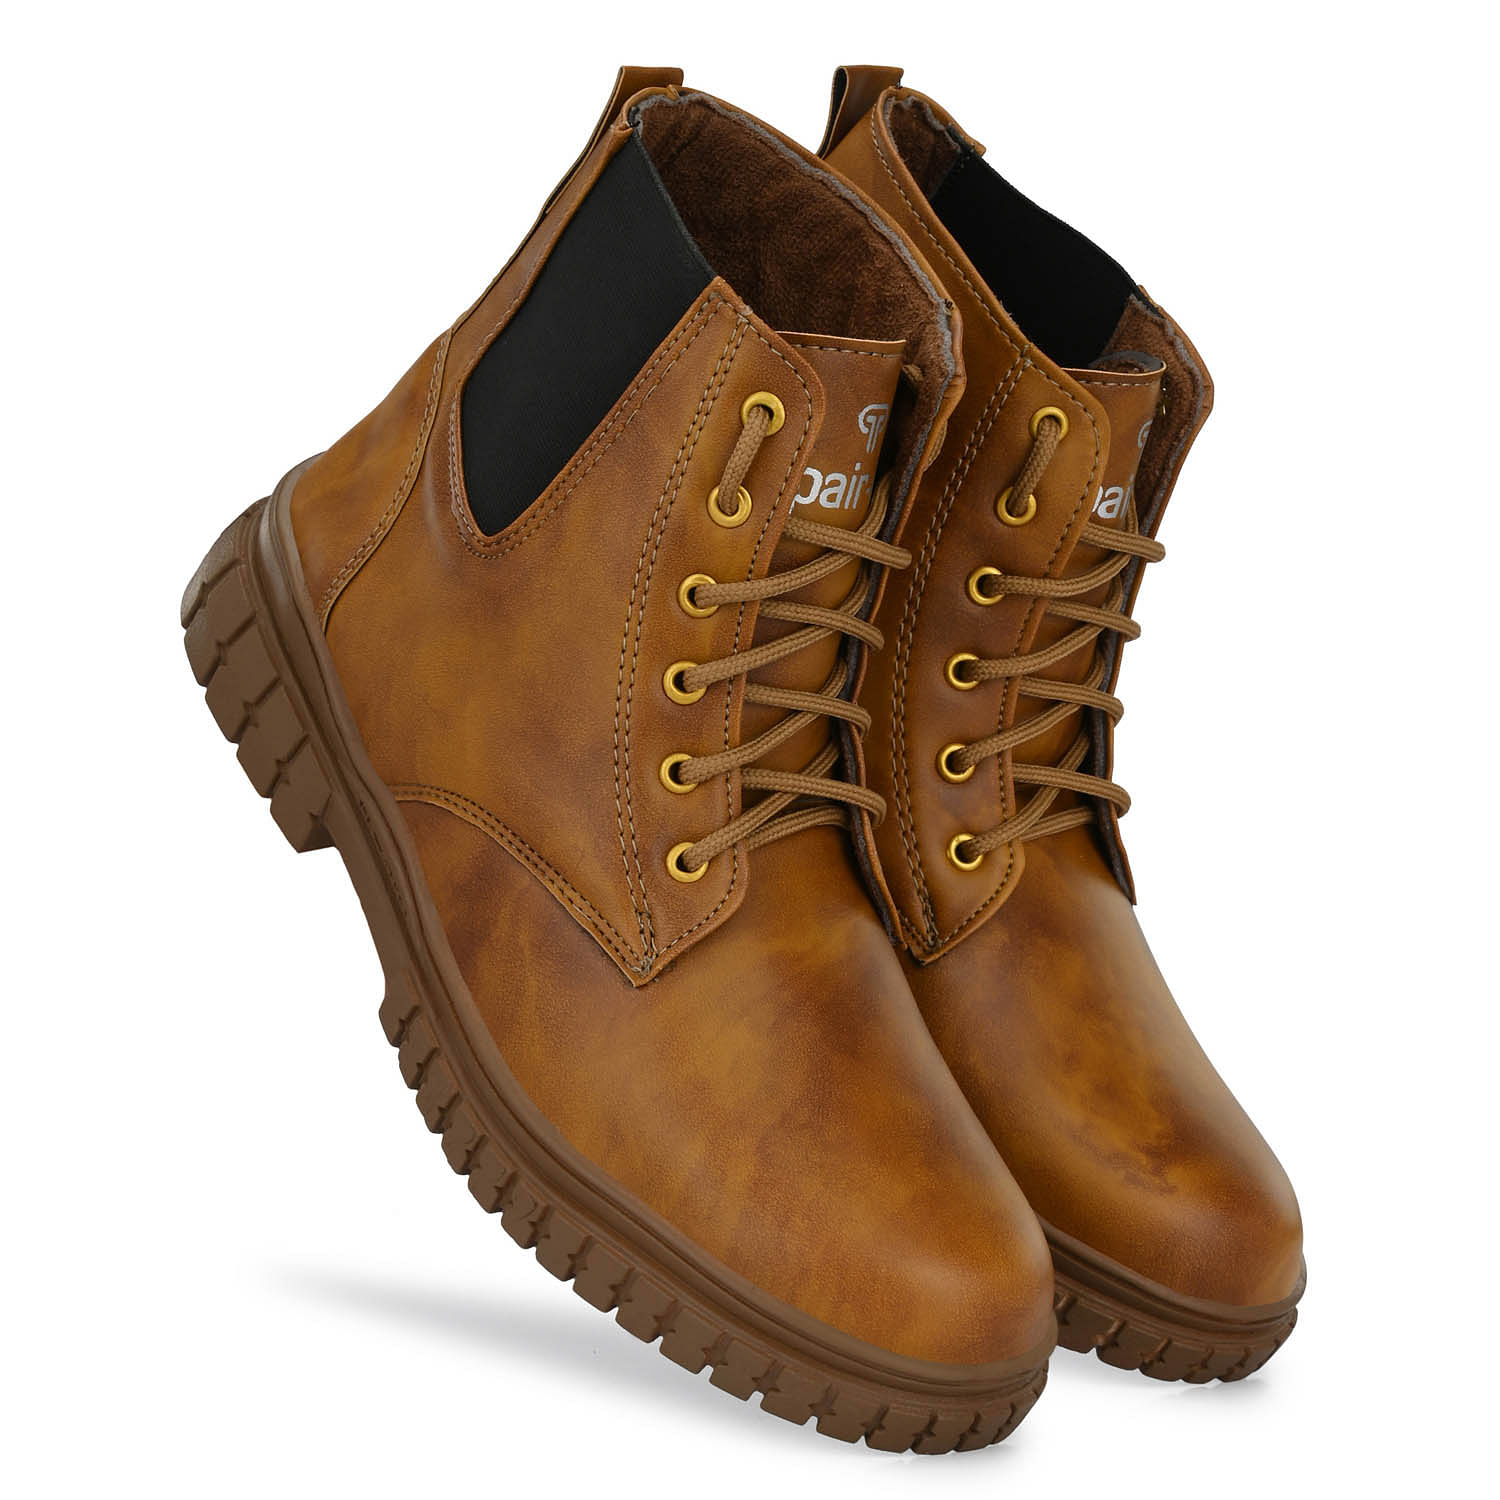 Pair-it Mens Ankle Boot-LZ-MN-BOOT-306-Teak